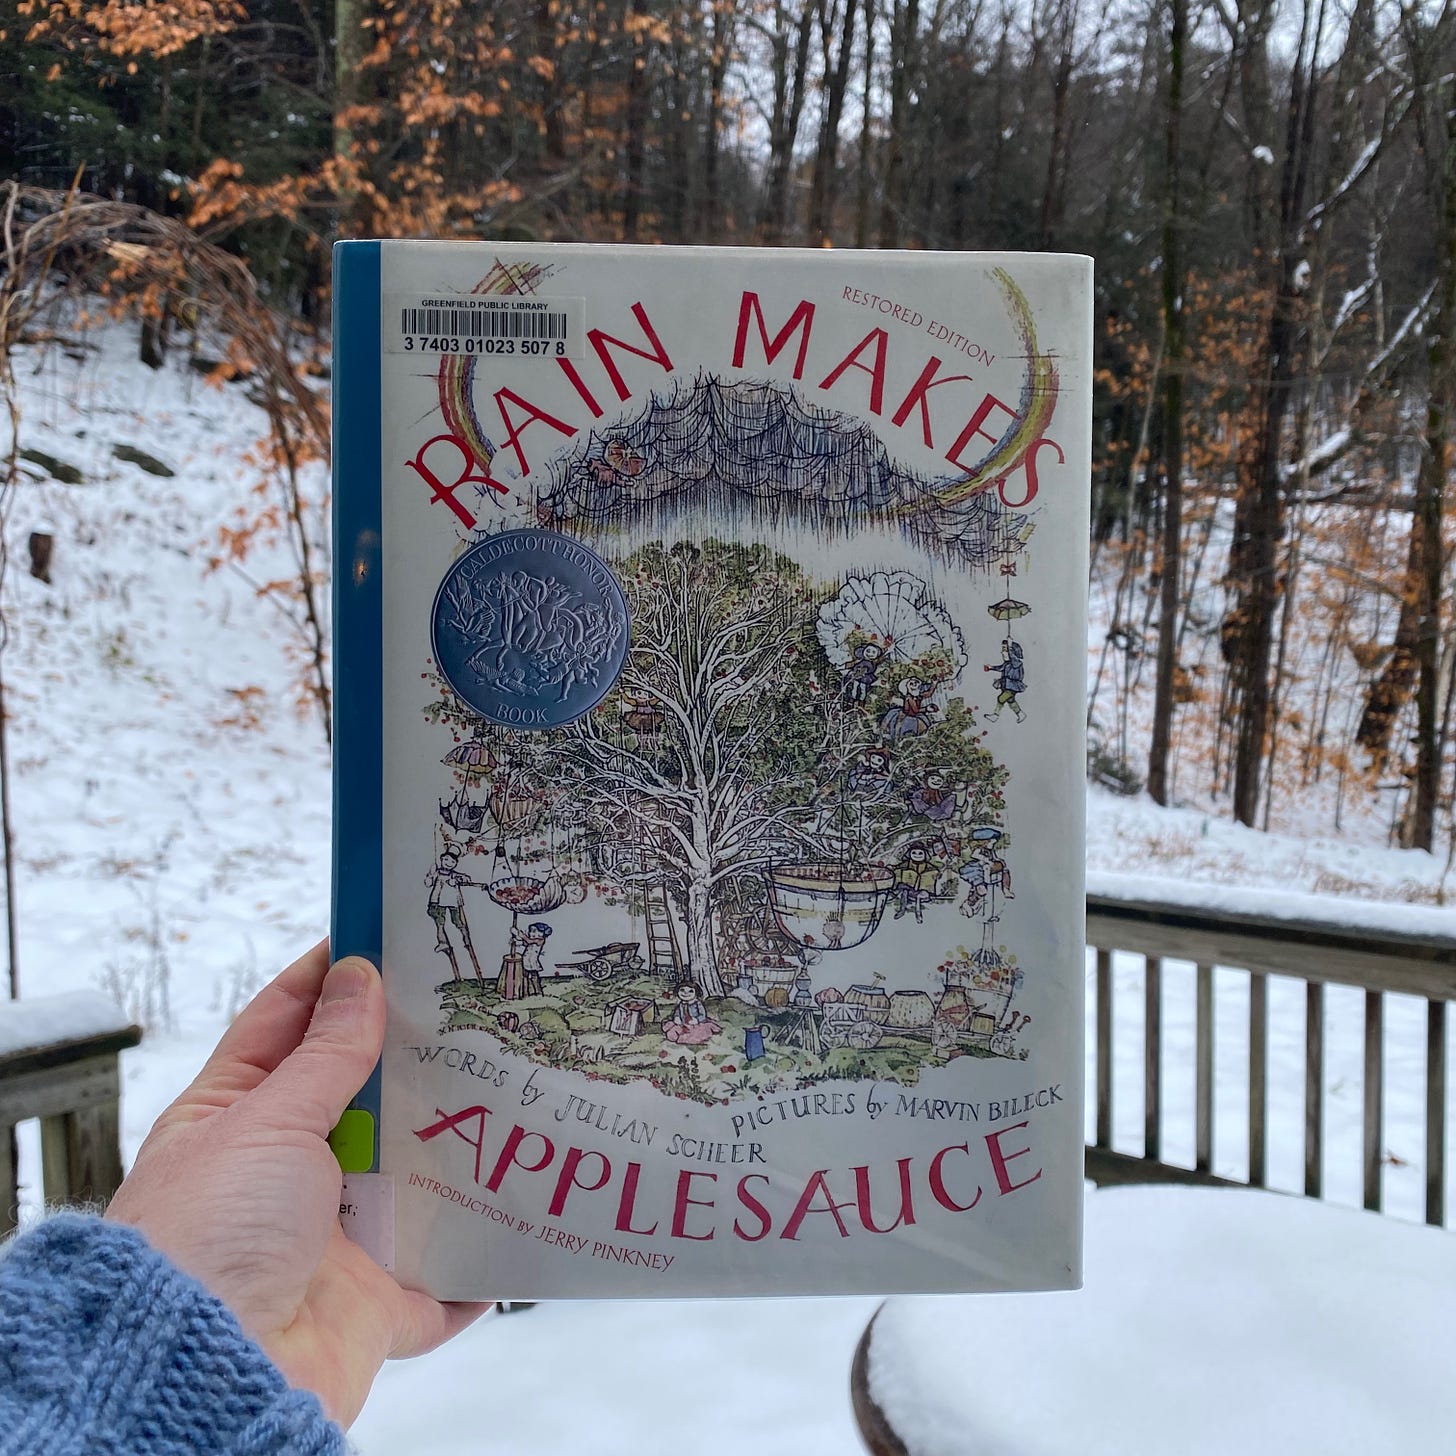 I’m holding up this book in front of a snowy yard.